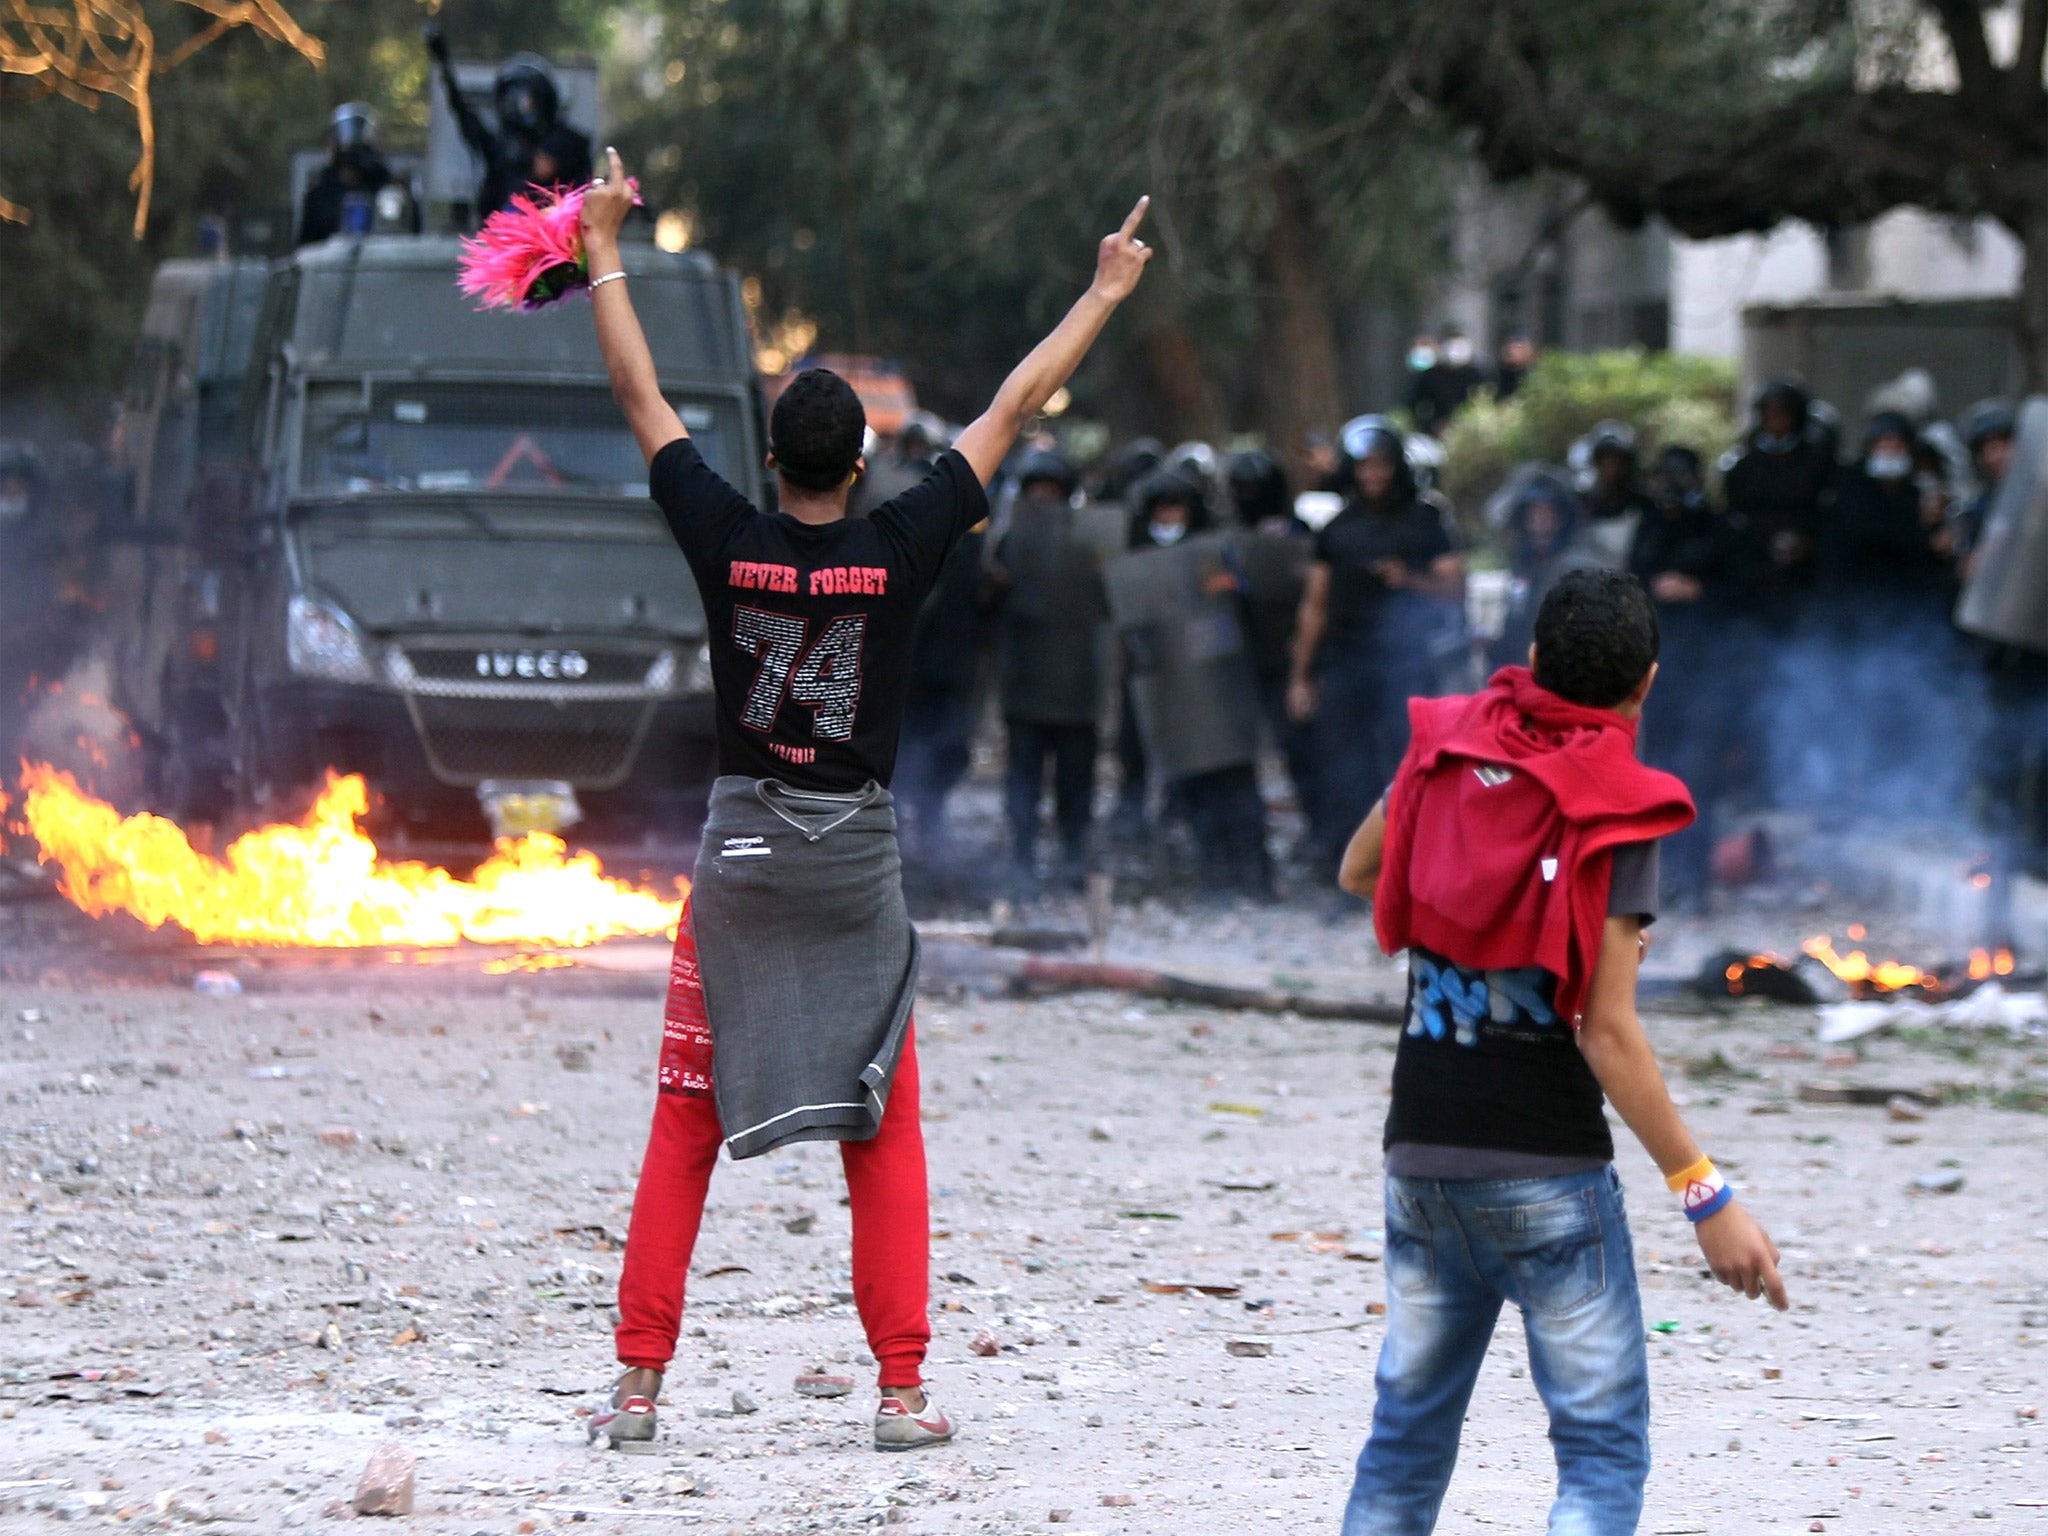 Egyptian police fired tear gas against protesters in Tahrir Square yesterday